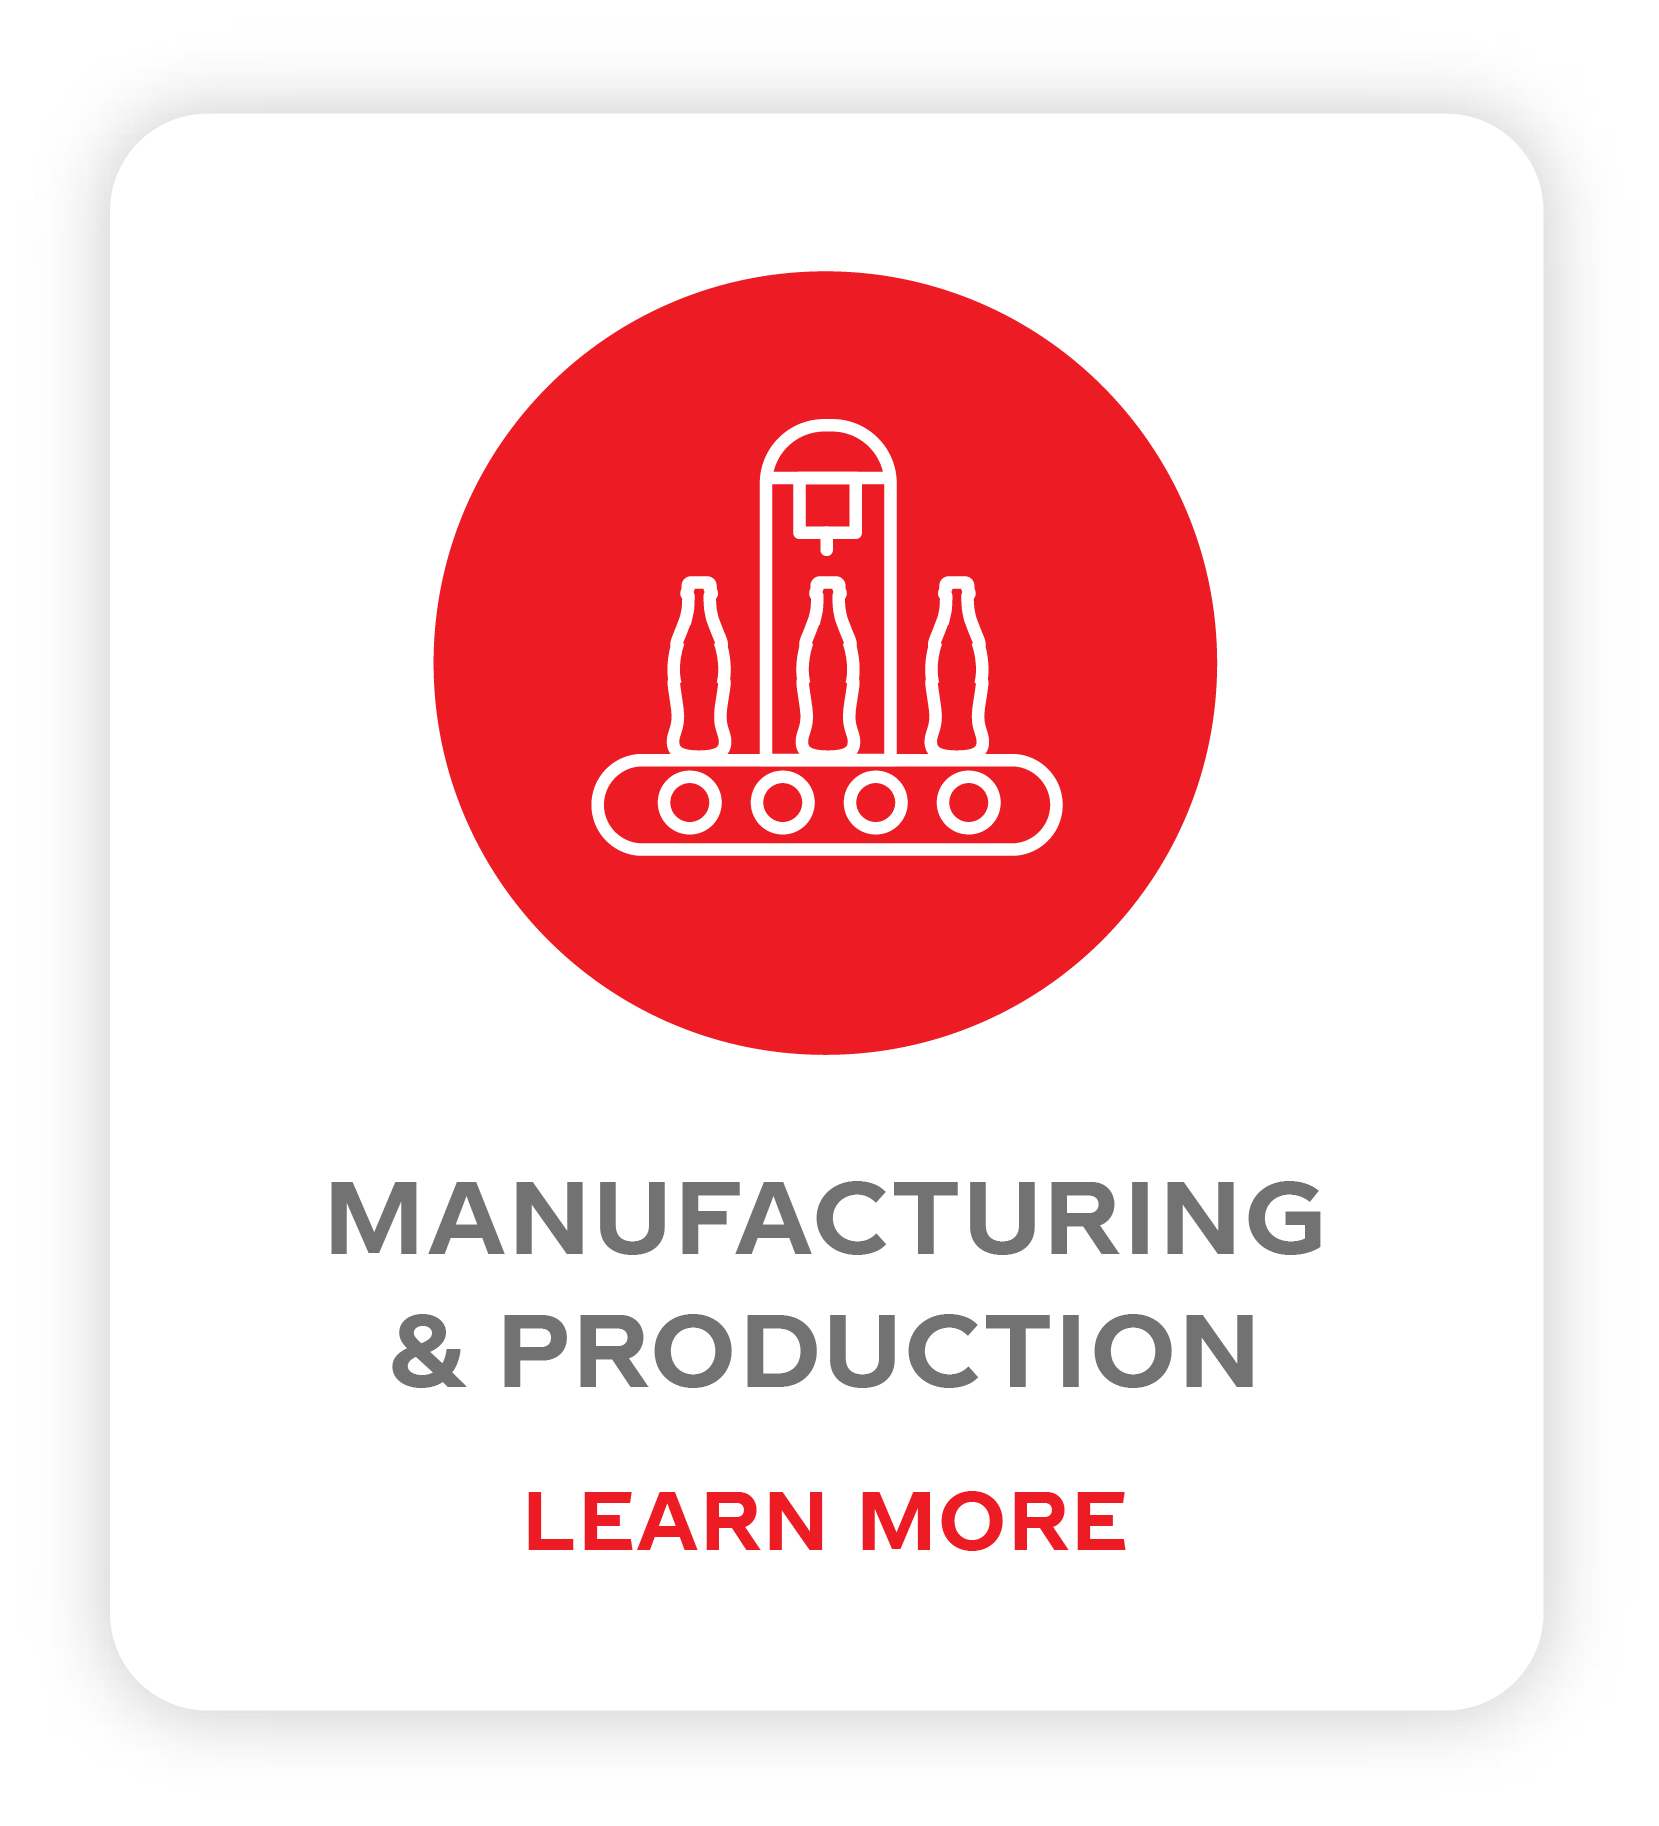 MANUFACTURING & PRODUCTION